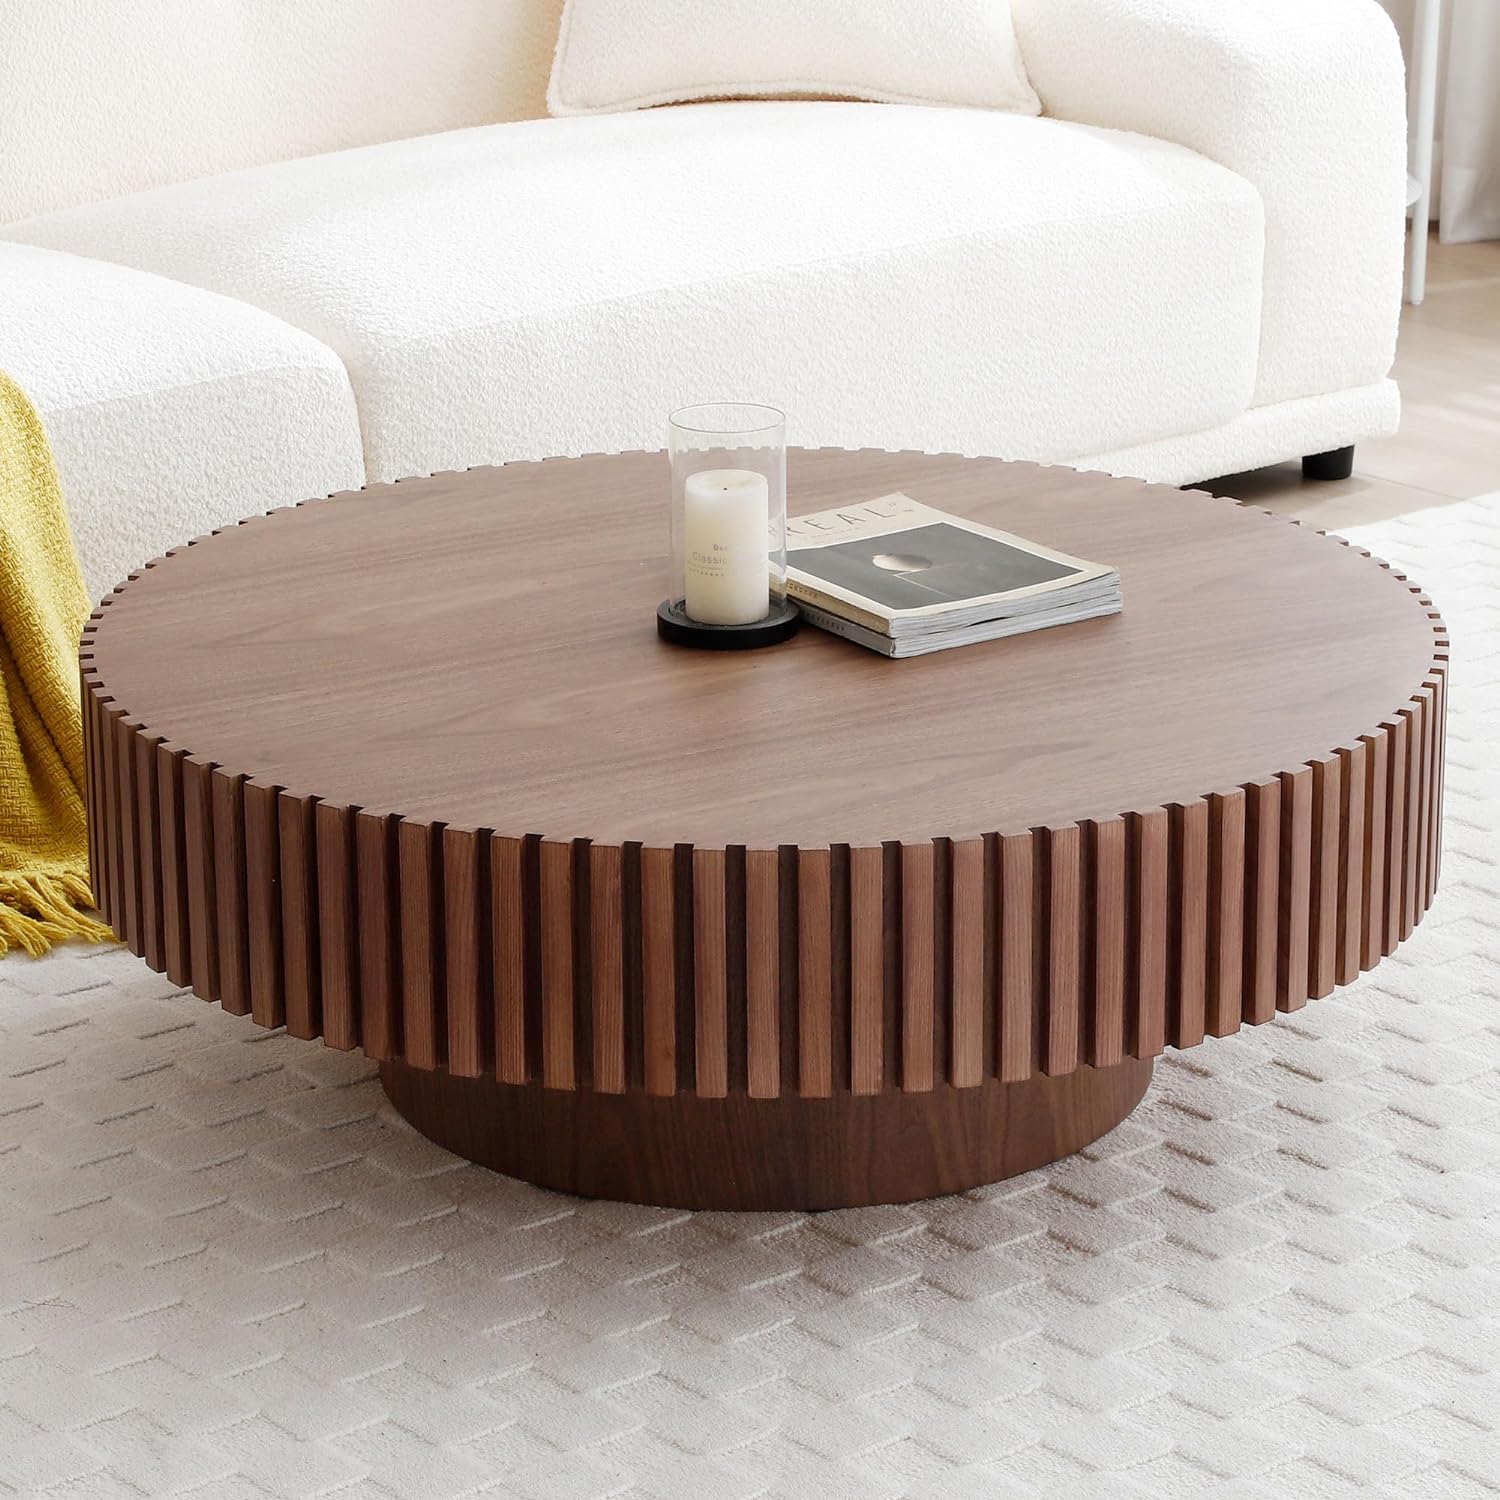 WILLIAMSPACE 39.4 Walnut Round Coffee Table, Modern Luxury Wood Circle Drum Center Table for Living Room, Accent Side Table End Table for Apartment, 39.4'' x 13.4''H (Walnut)